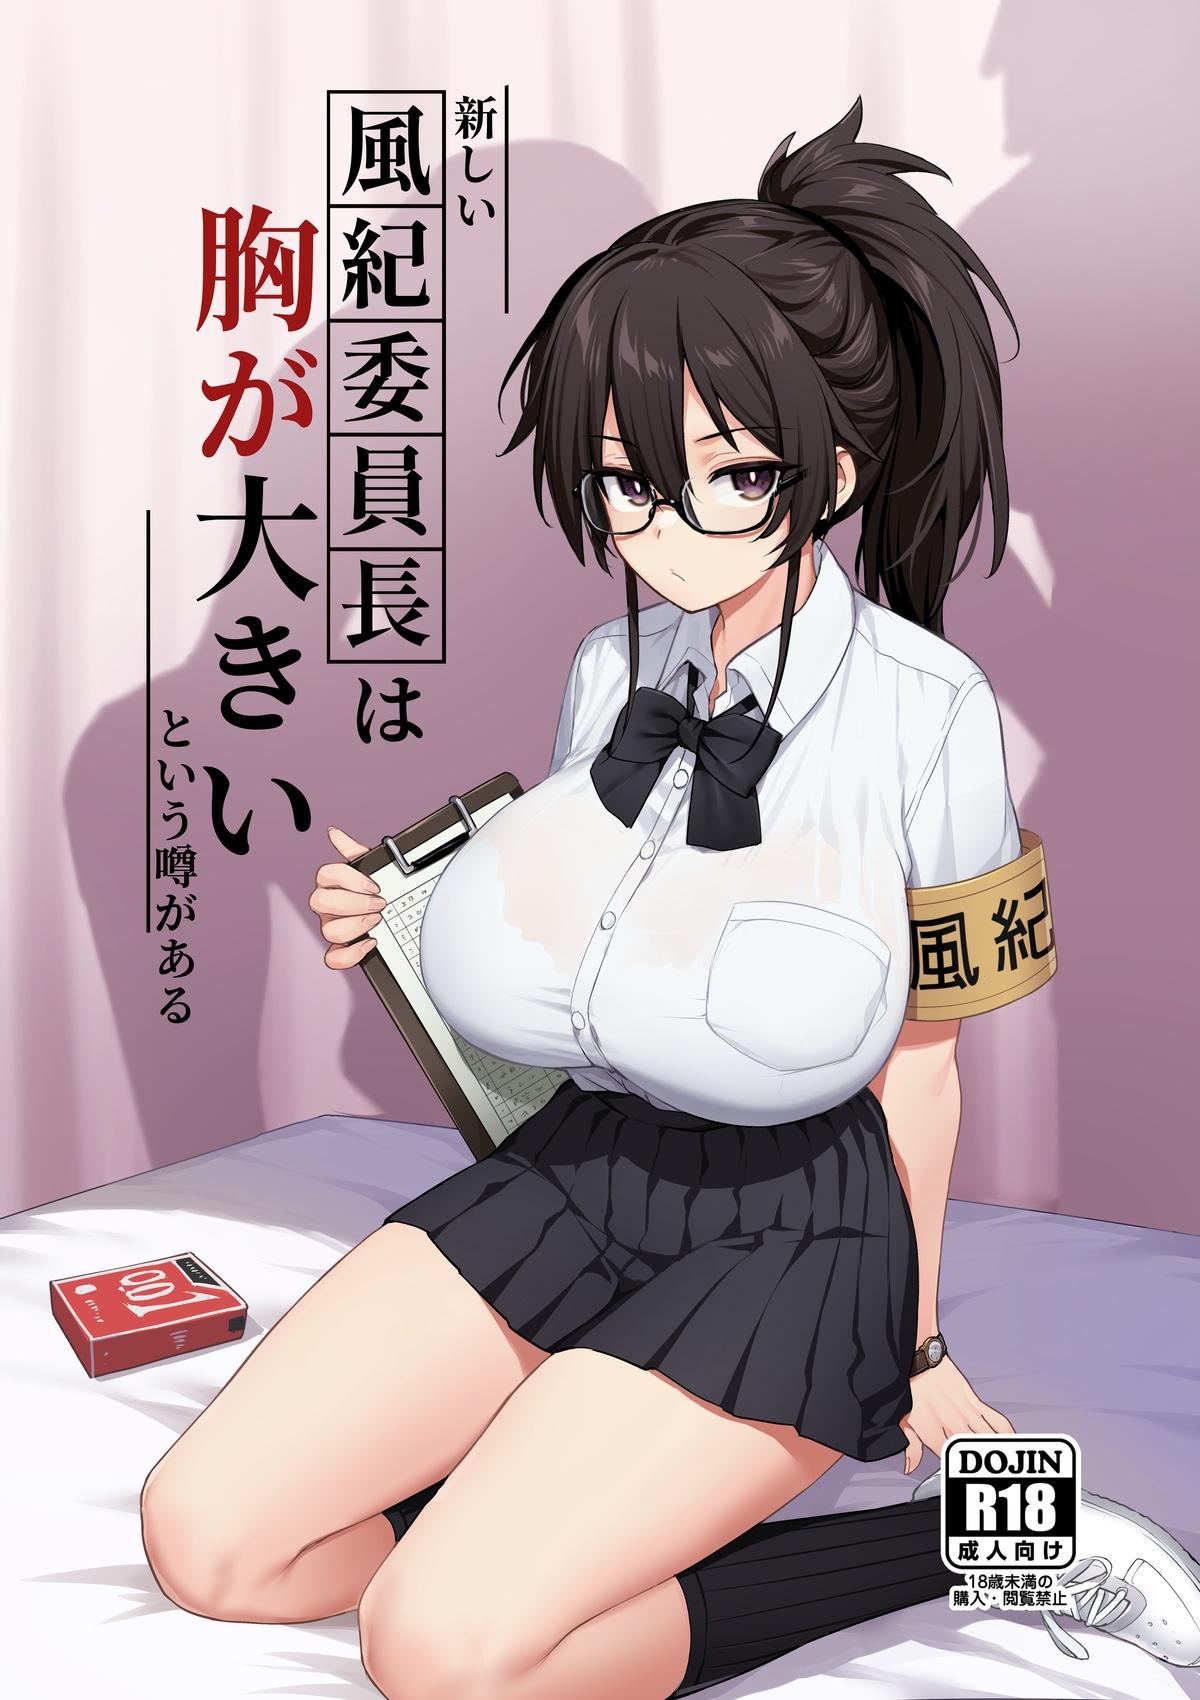 Sexcam Rumor Has It That The New Chairman of Disciplinary Committee Has Huge Breasts. Culo - Picture 1